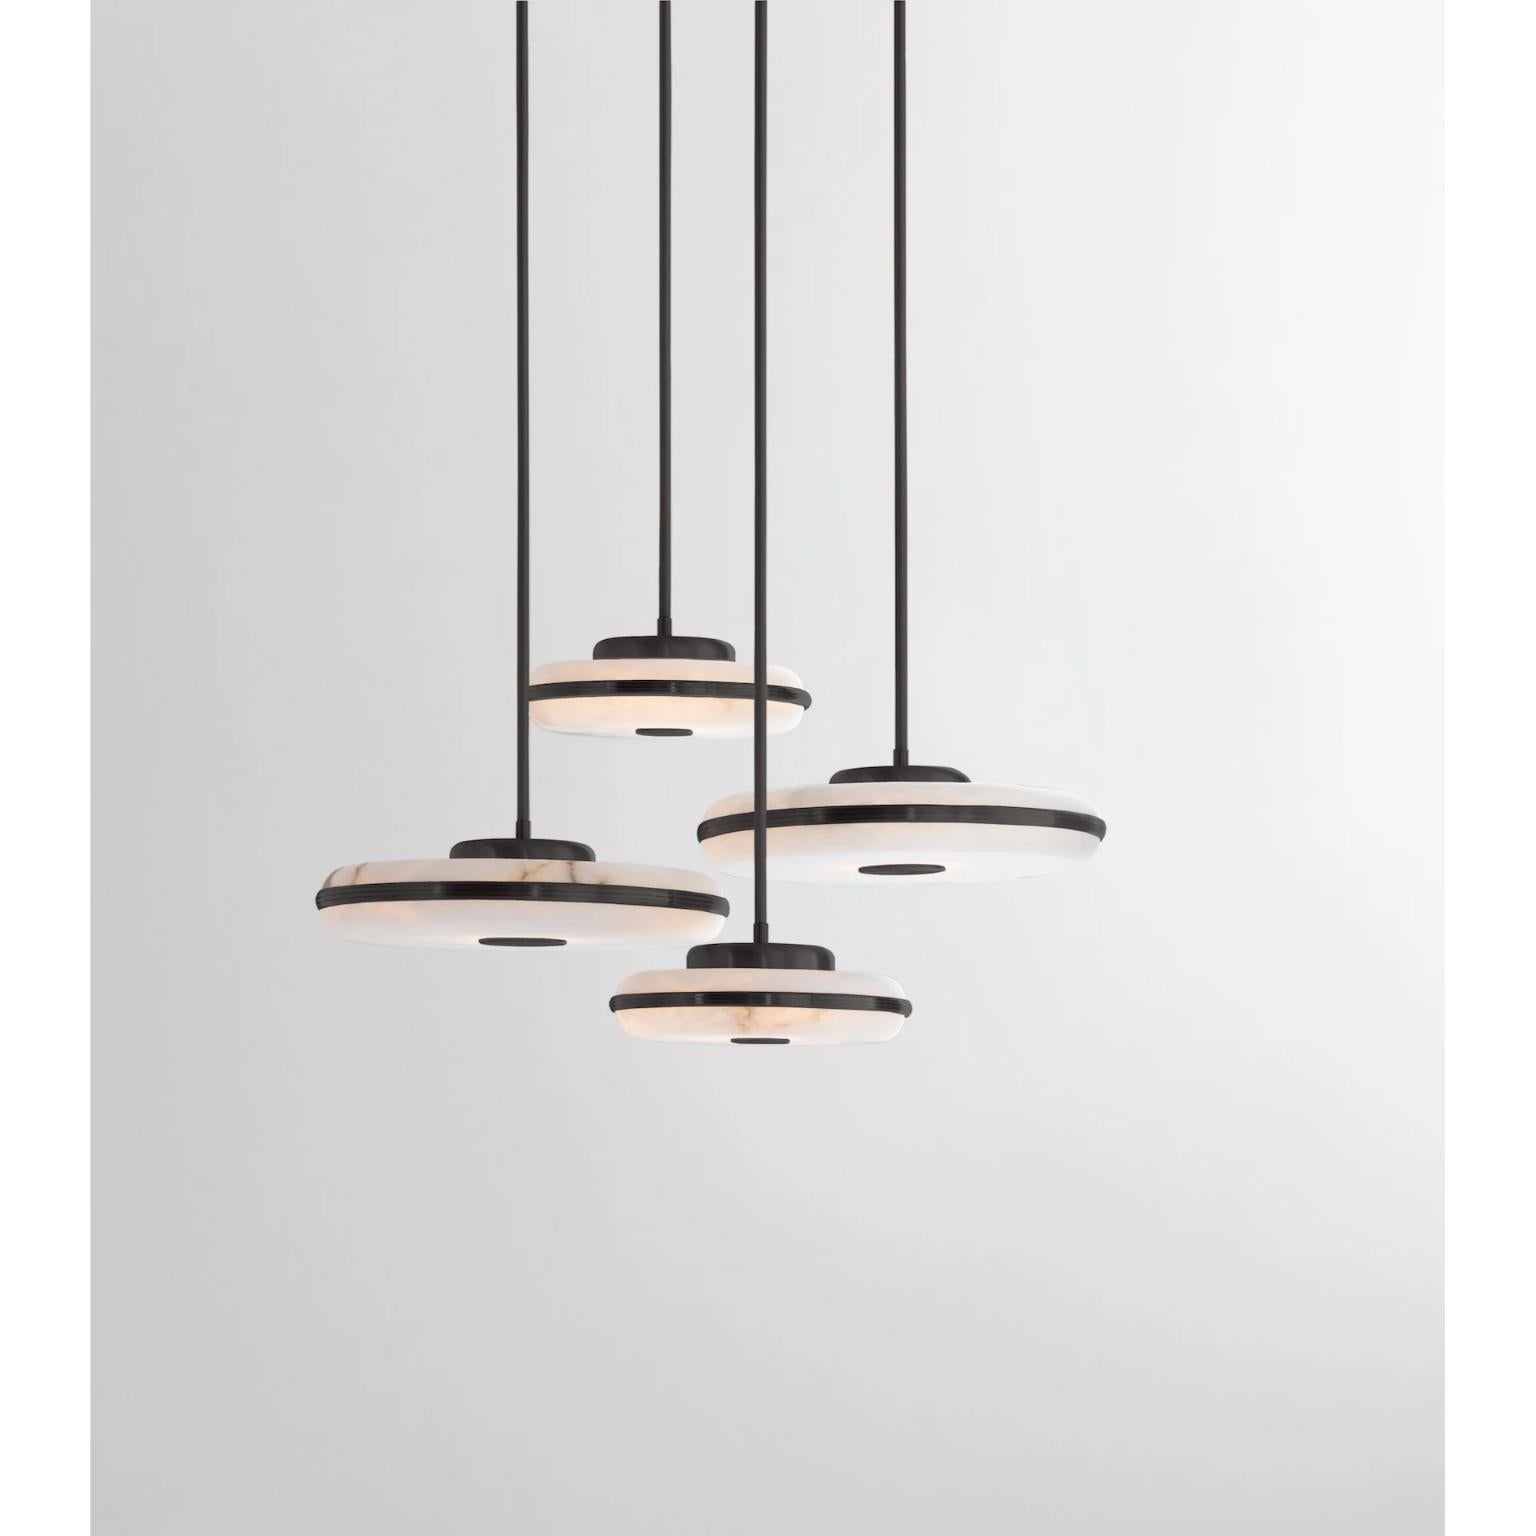 Beran Dark Bronze Chandelier 4 by Bert Frank
Dimensions: Ø 58 x H 100 cm. 
Materials: Bronze and alabaster.

Available in two different sizes. Available in different finishes and materials. Height is customized to order. Please contact us. 

For